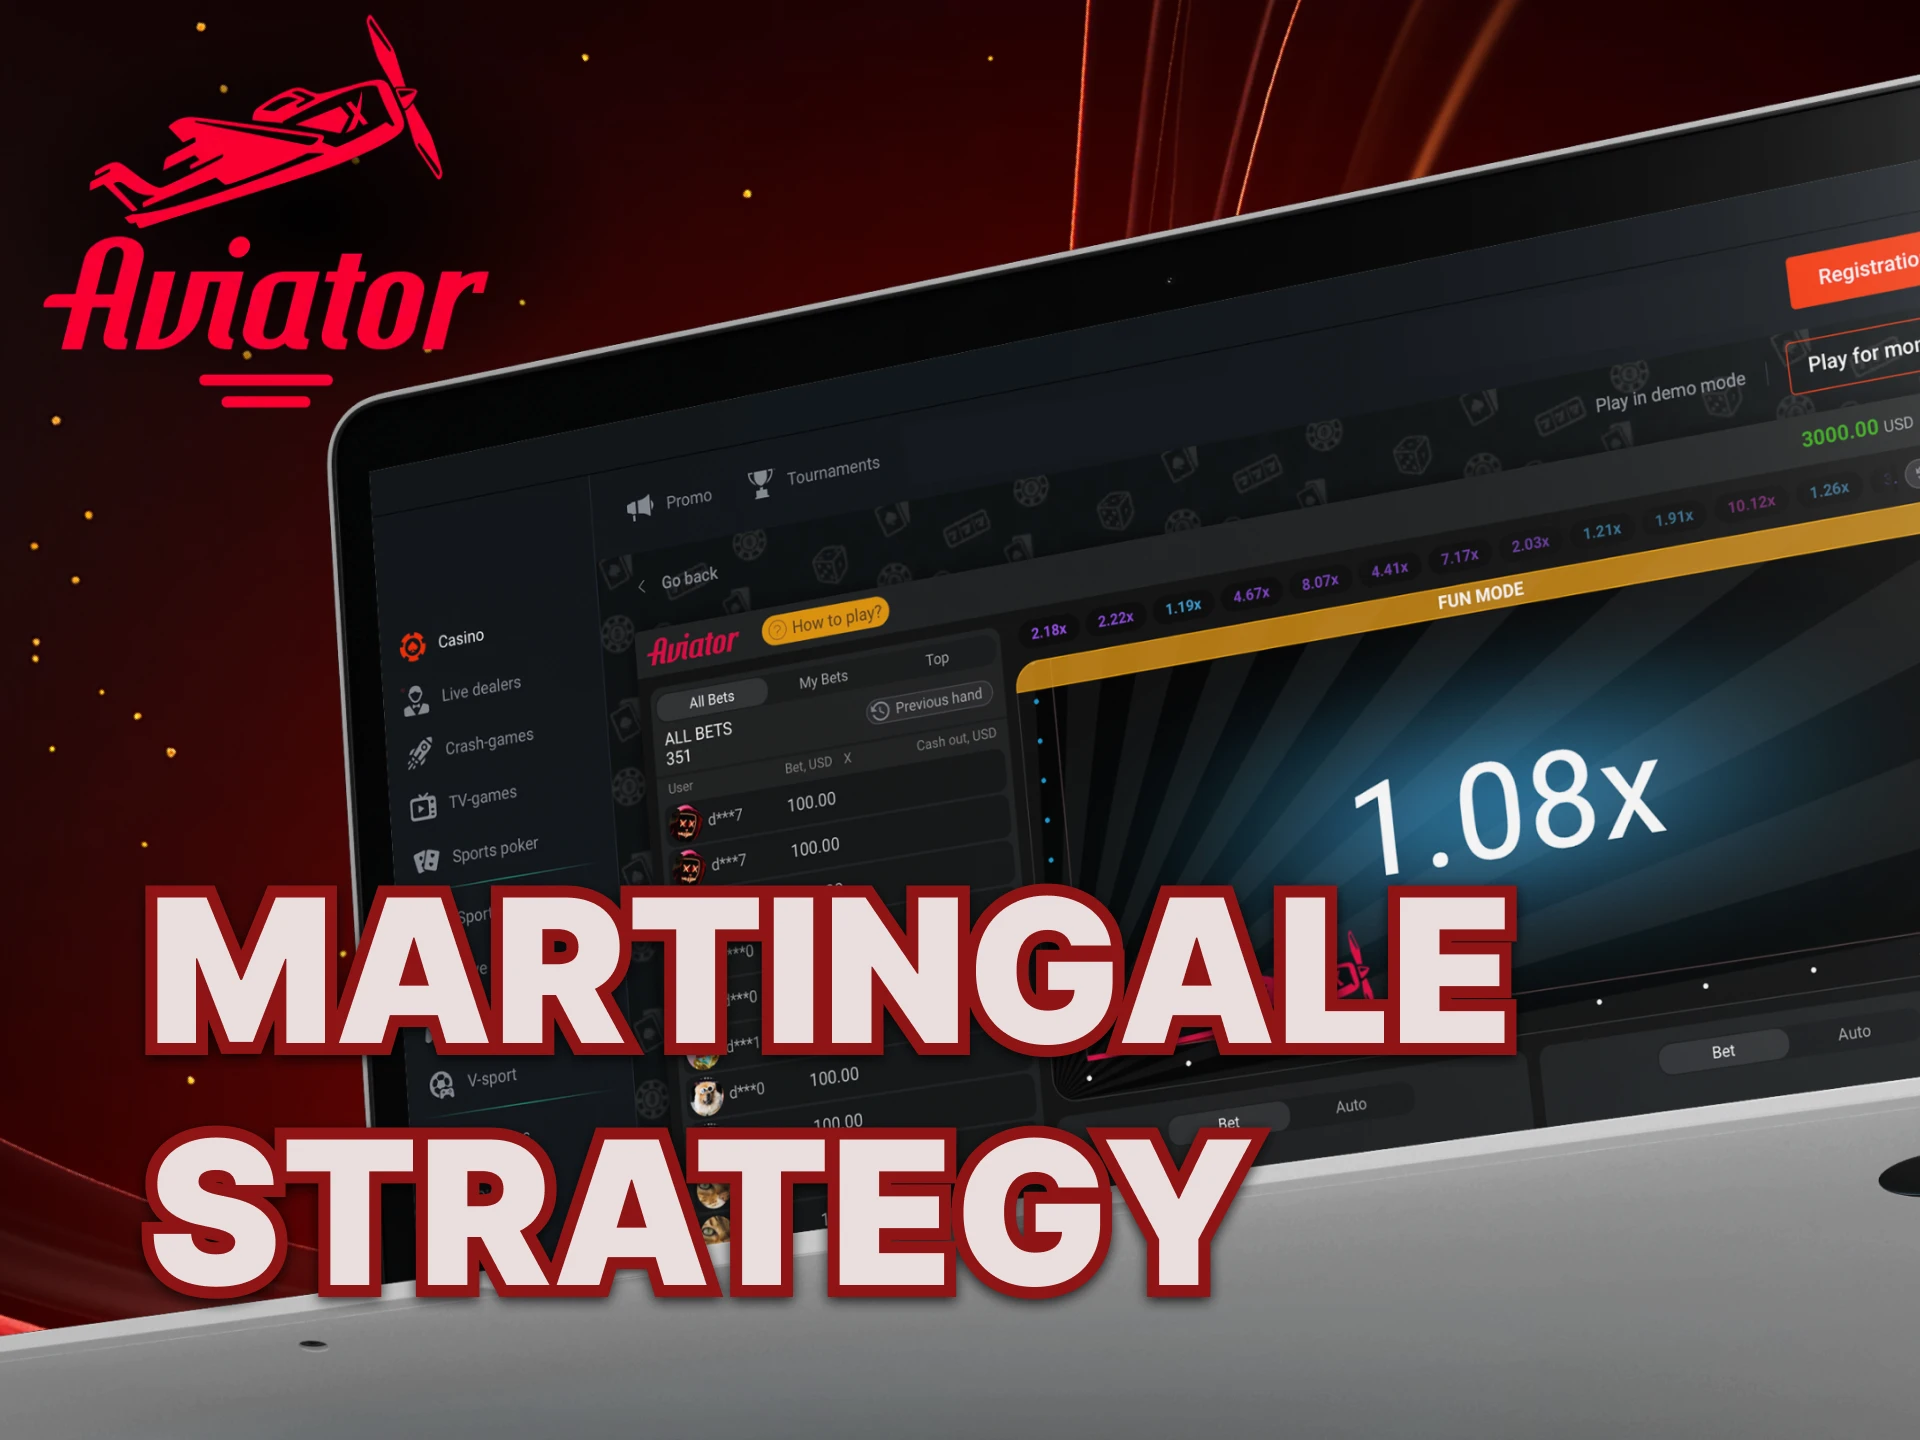 What is Martingale Strategy for the game Aviator.